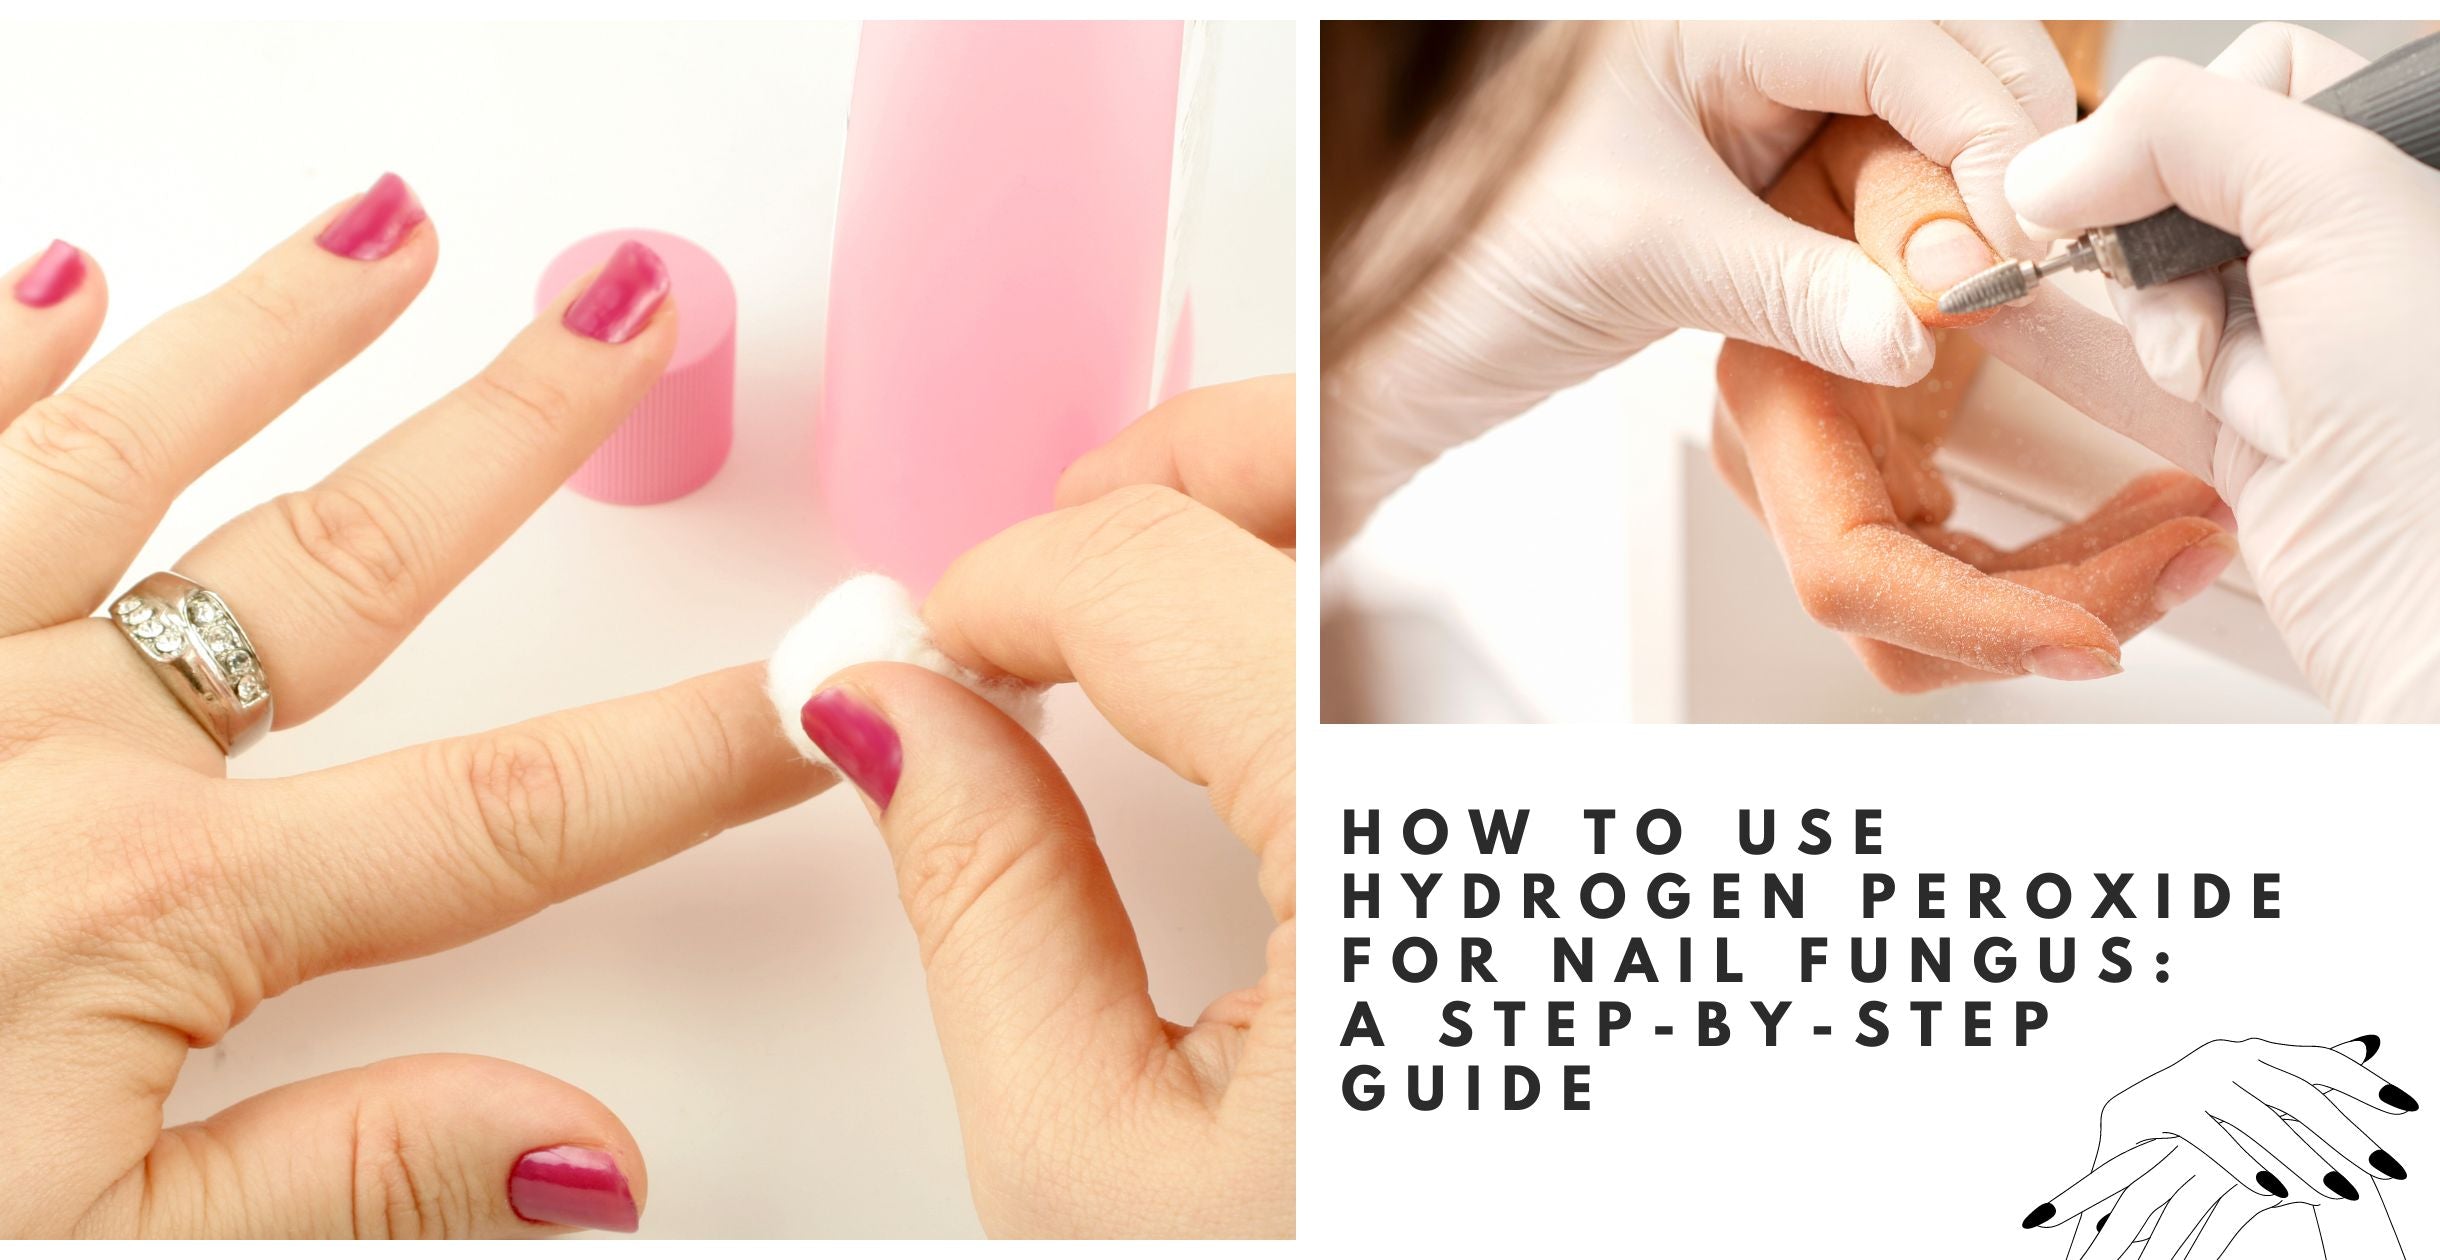 How To Use Hydrogen Peroxide For Nail Fungus: A Step-By-Step Guide